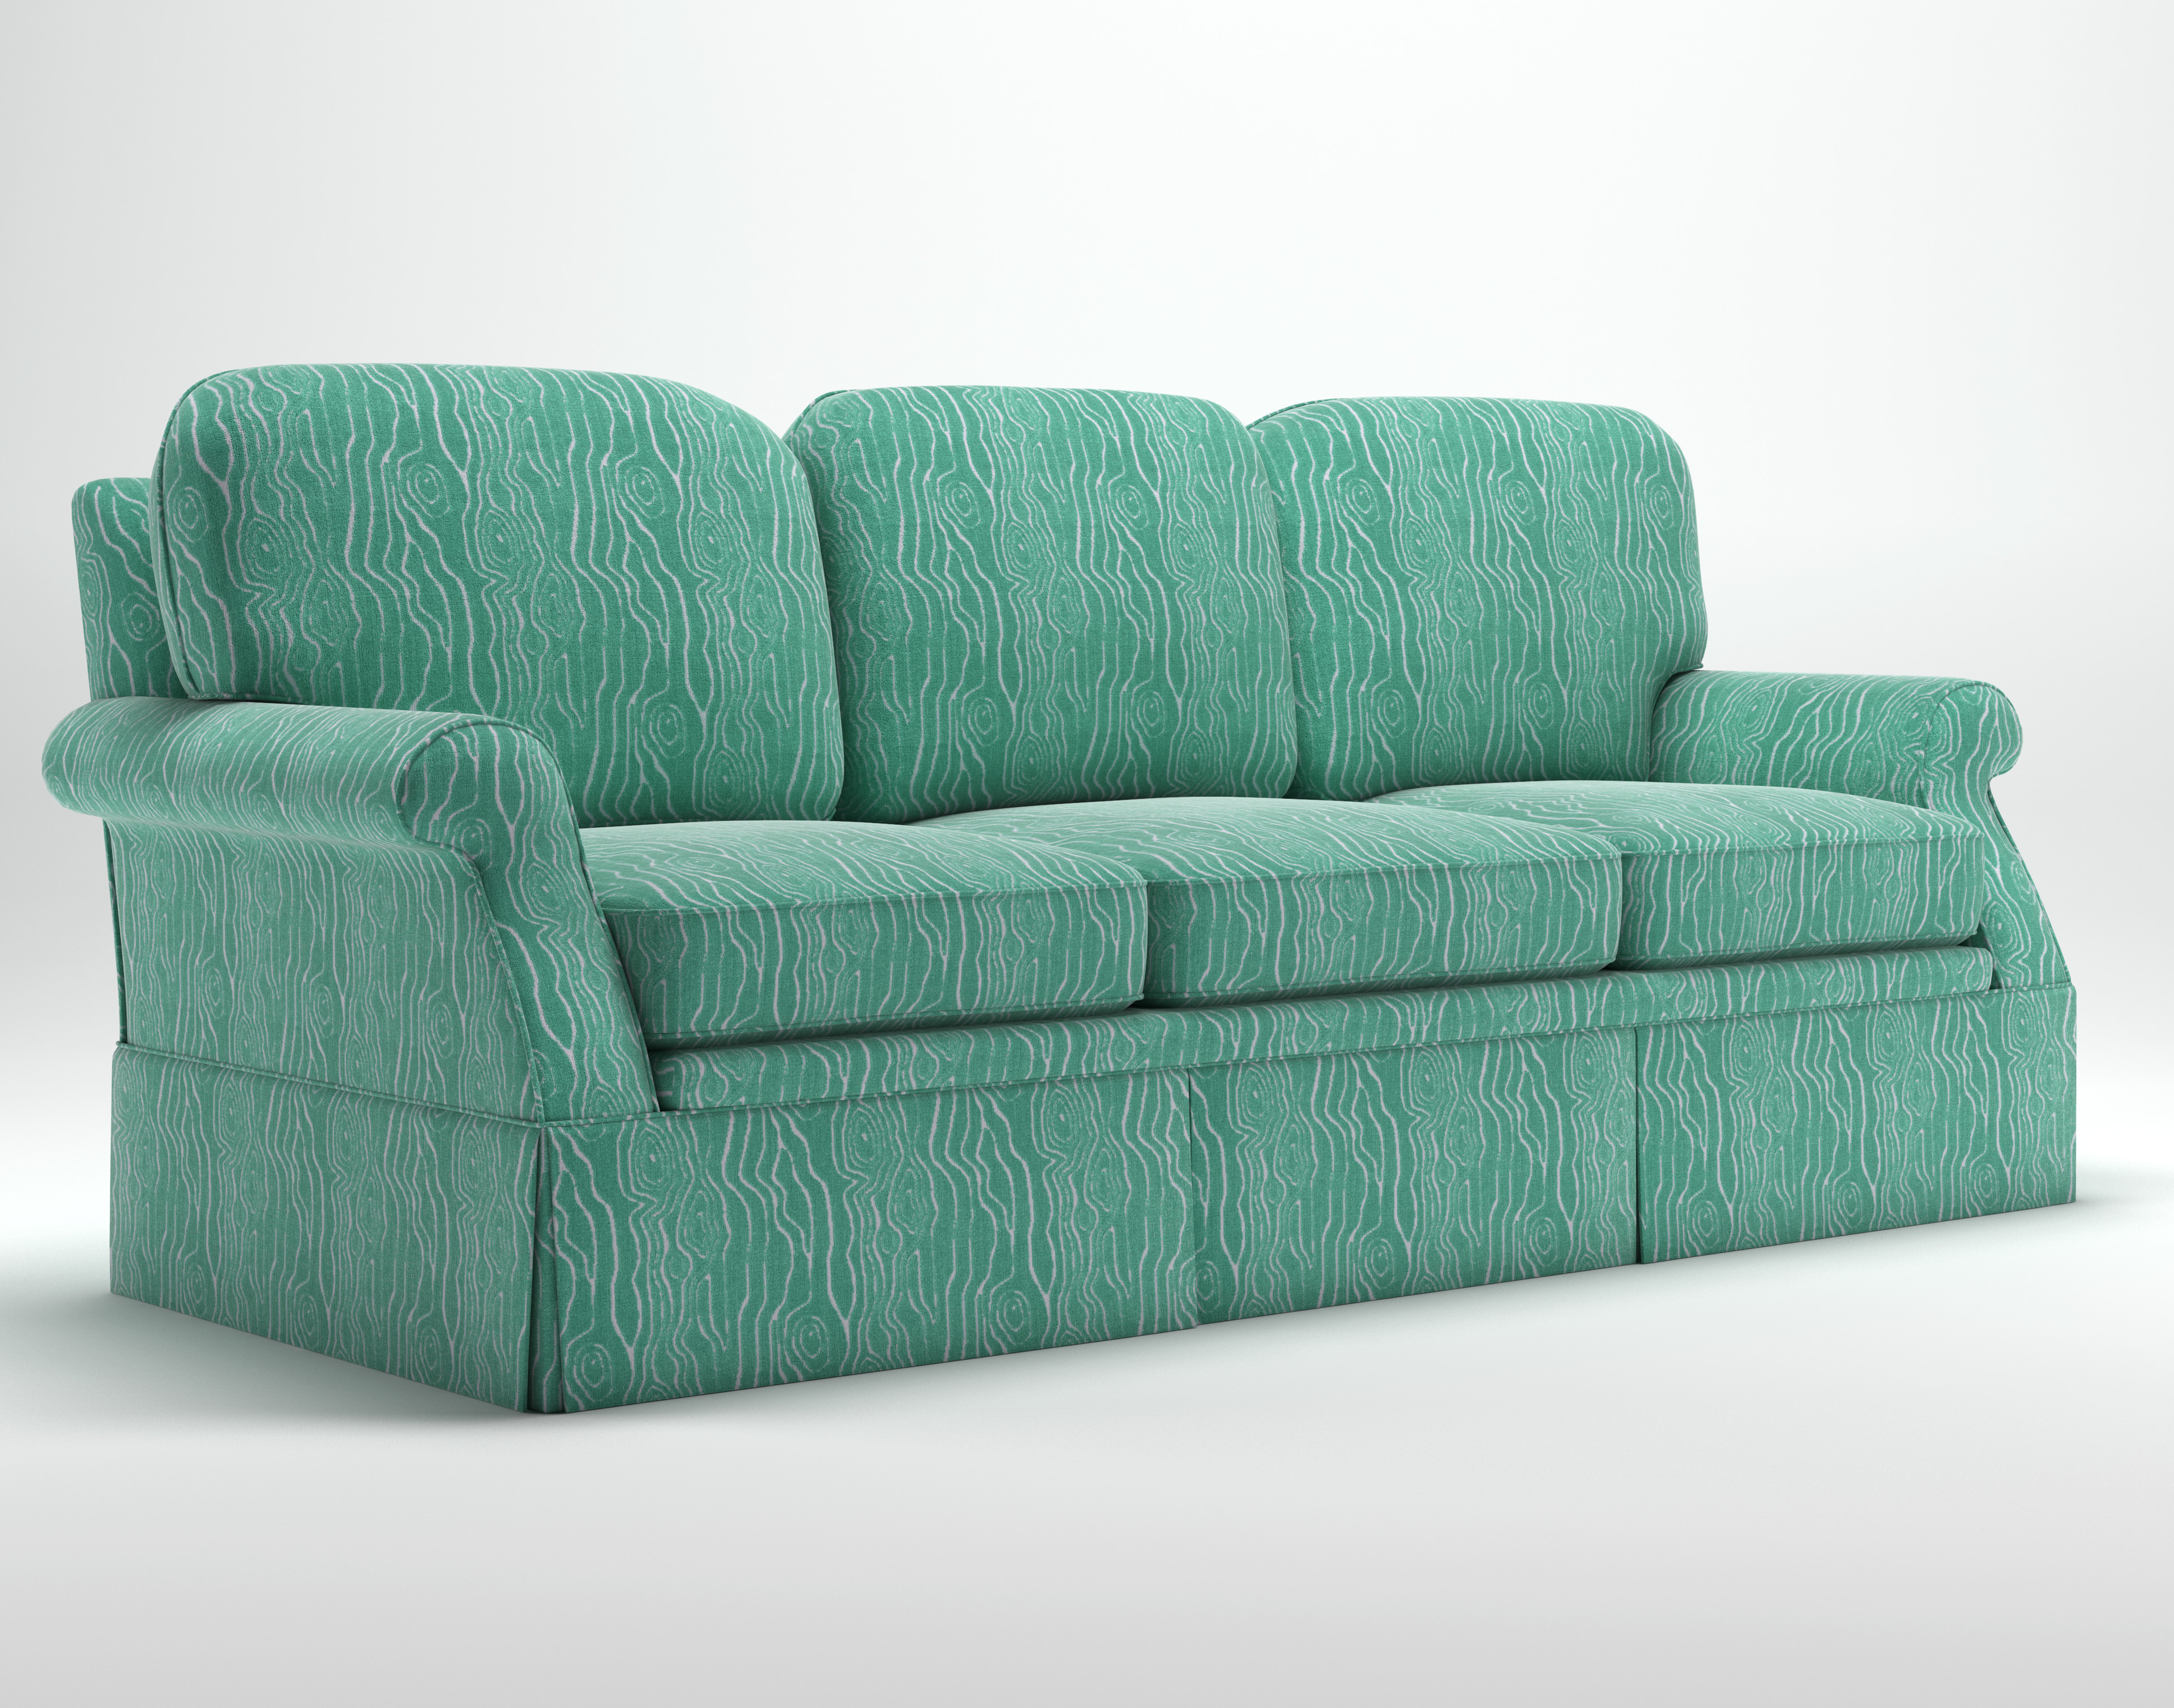 Sofa Style 2: Back cushion corners are more rounded off.